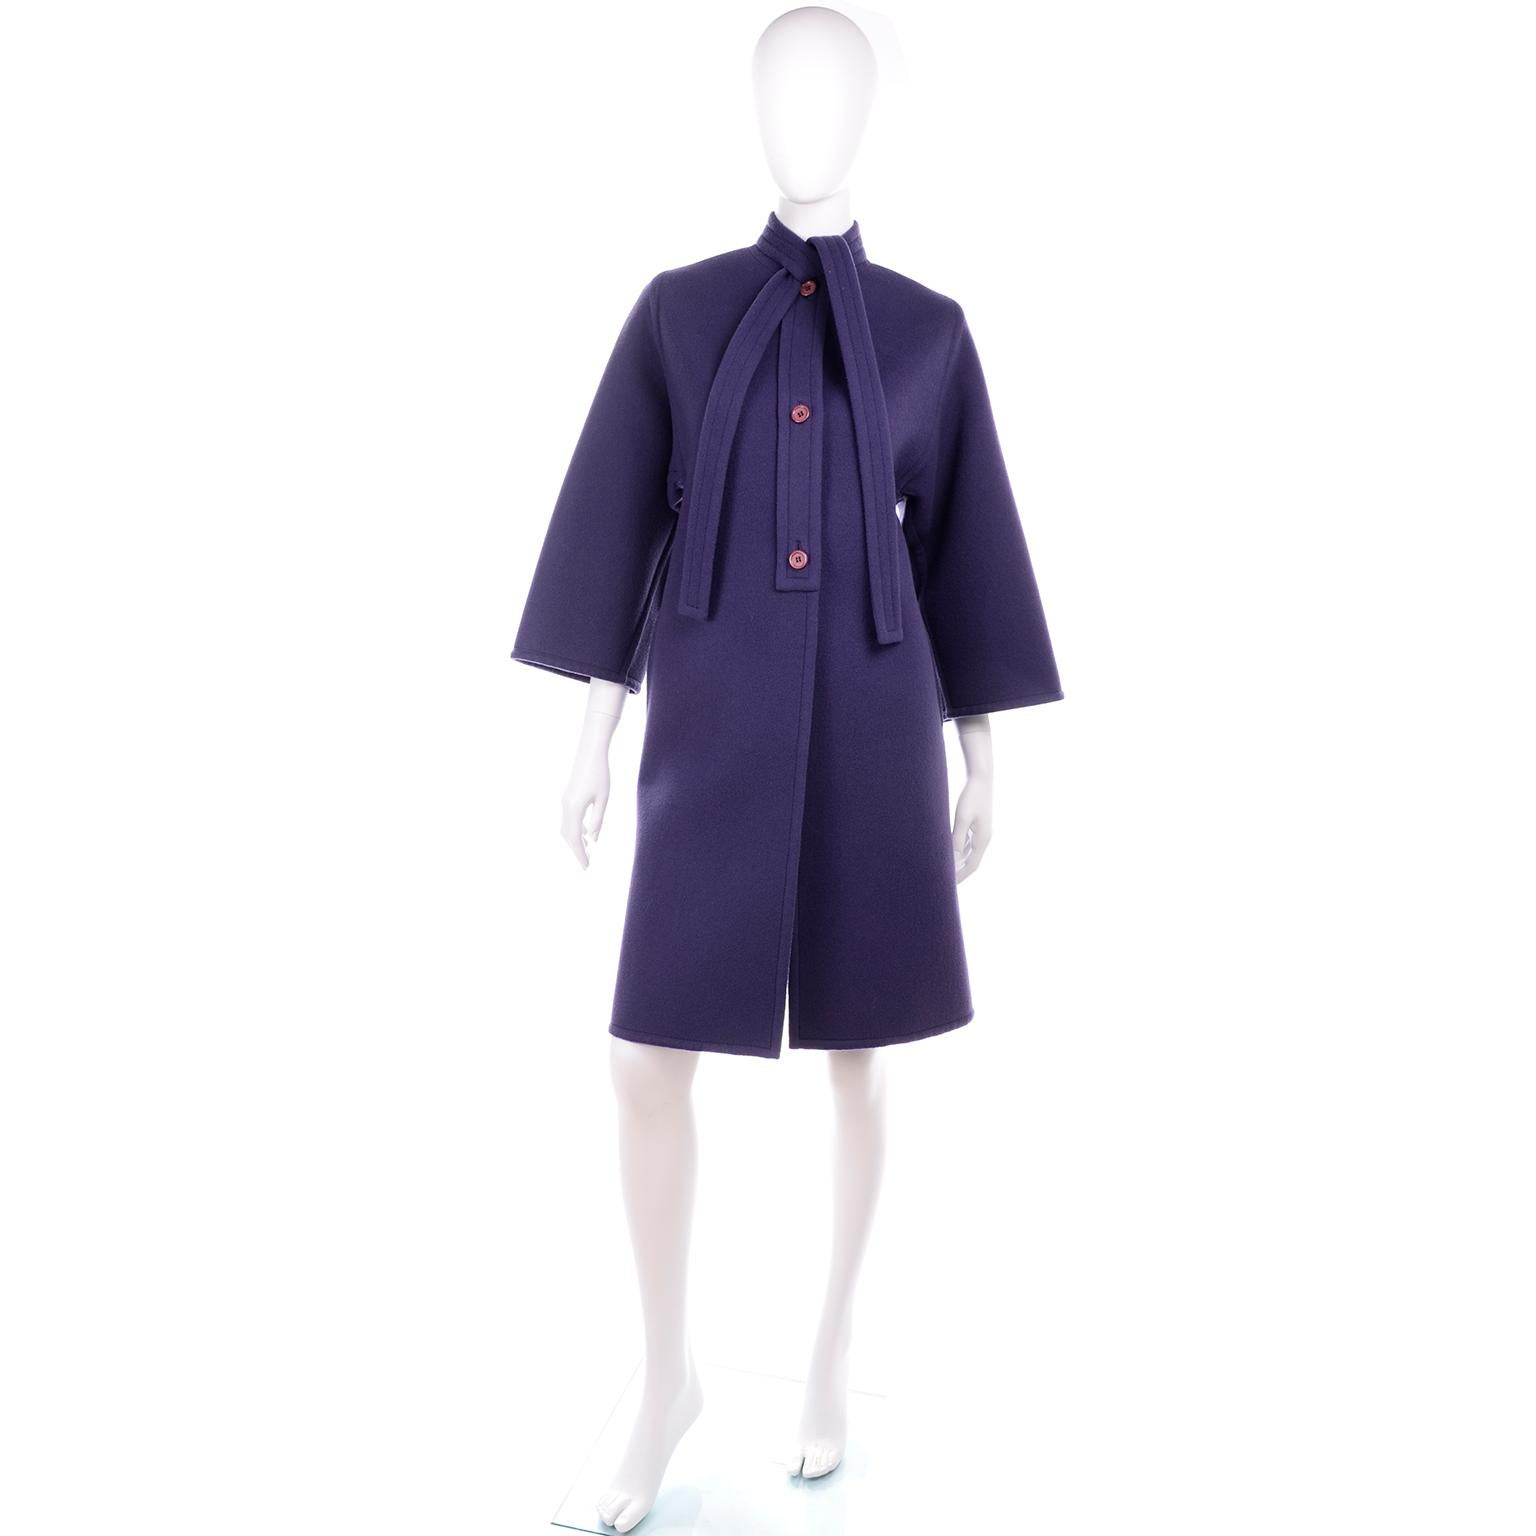 James Galanos Vintage Rich Purple Wool Coat with Tie & Pockets For Sale 2